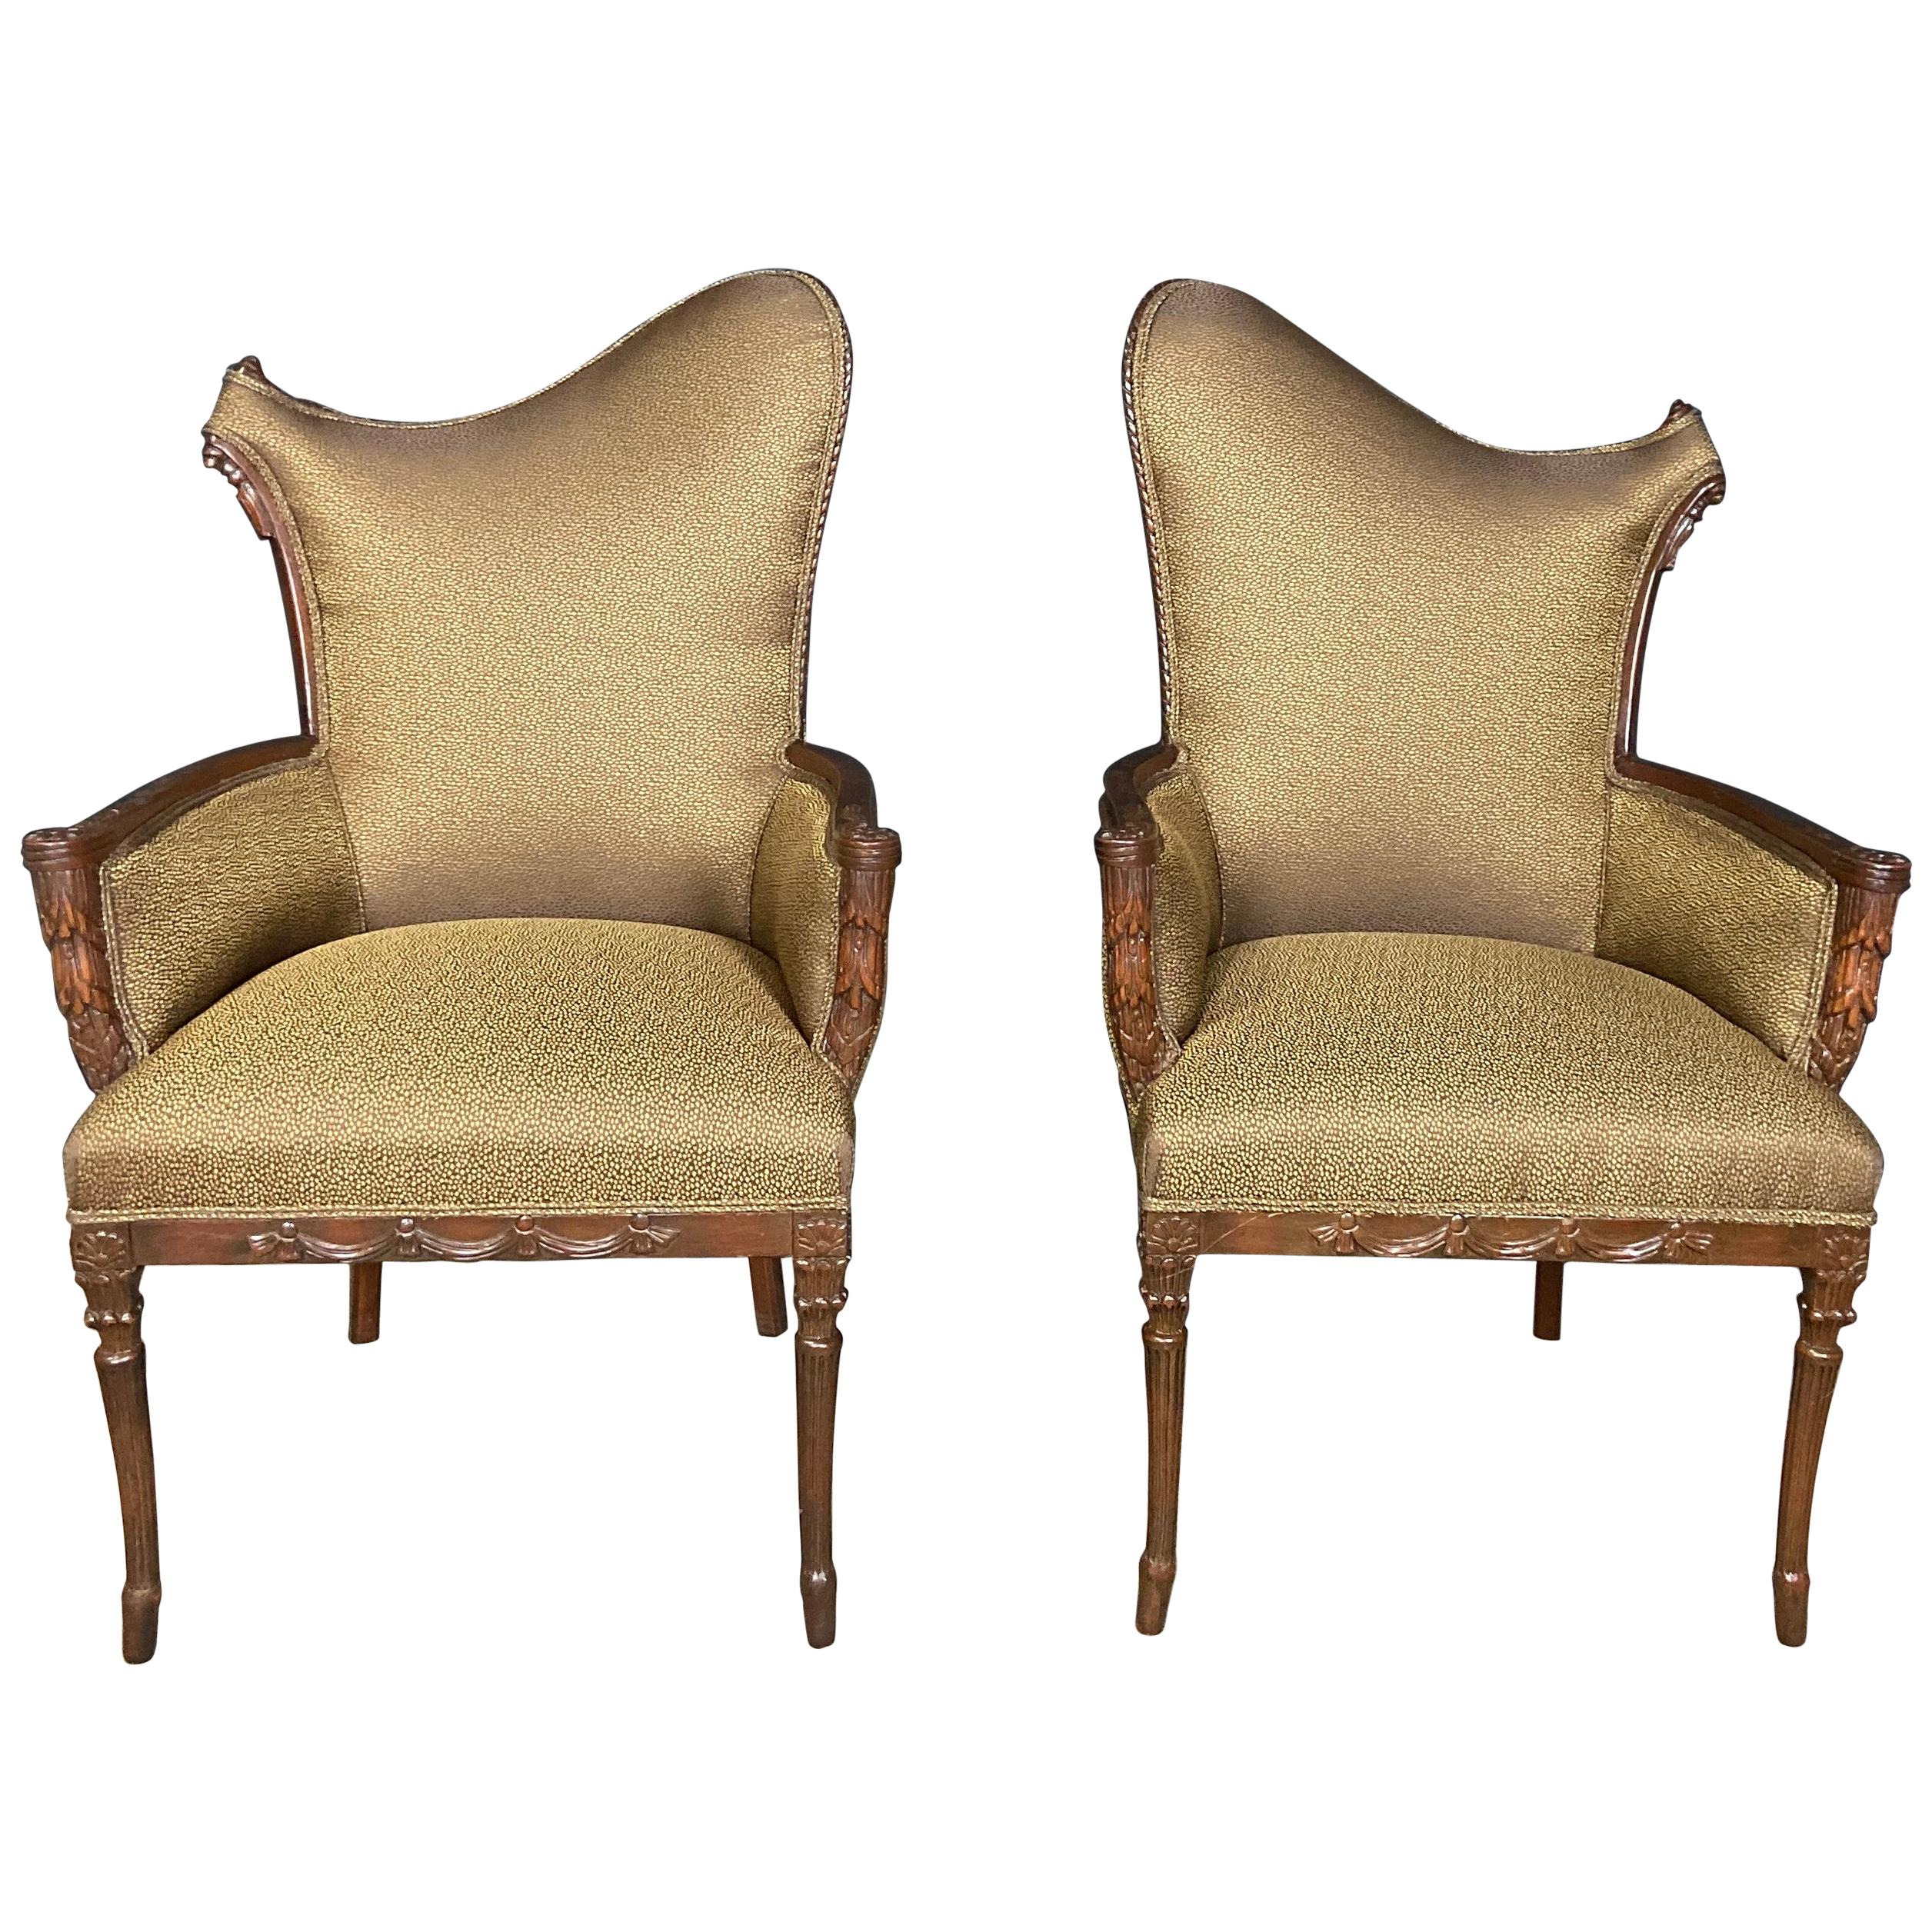 Pair of Carved Hollywood Regency Armchairs